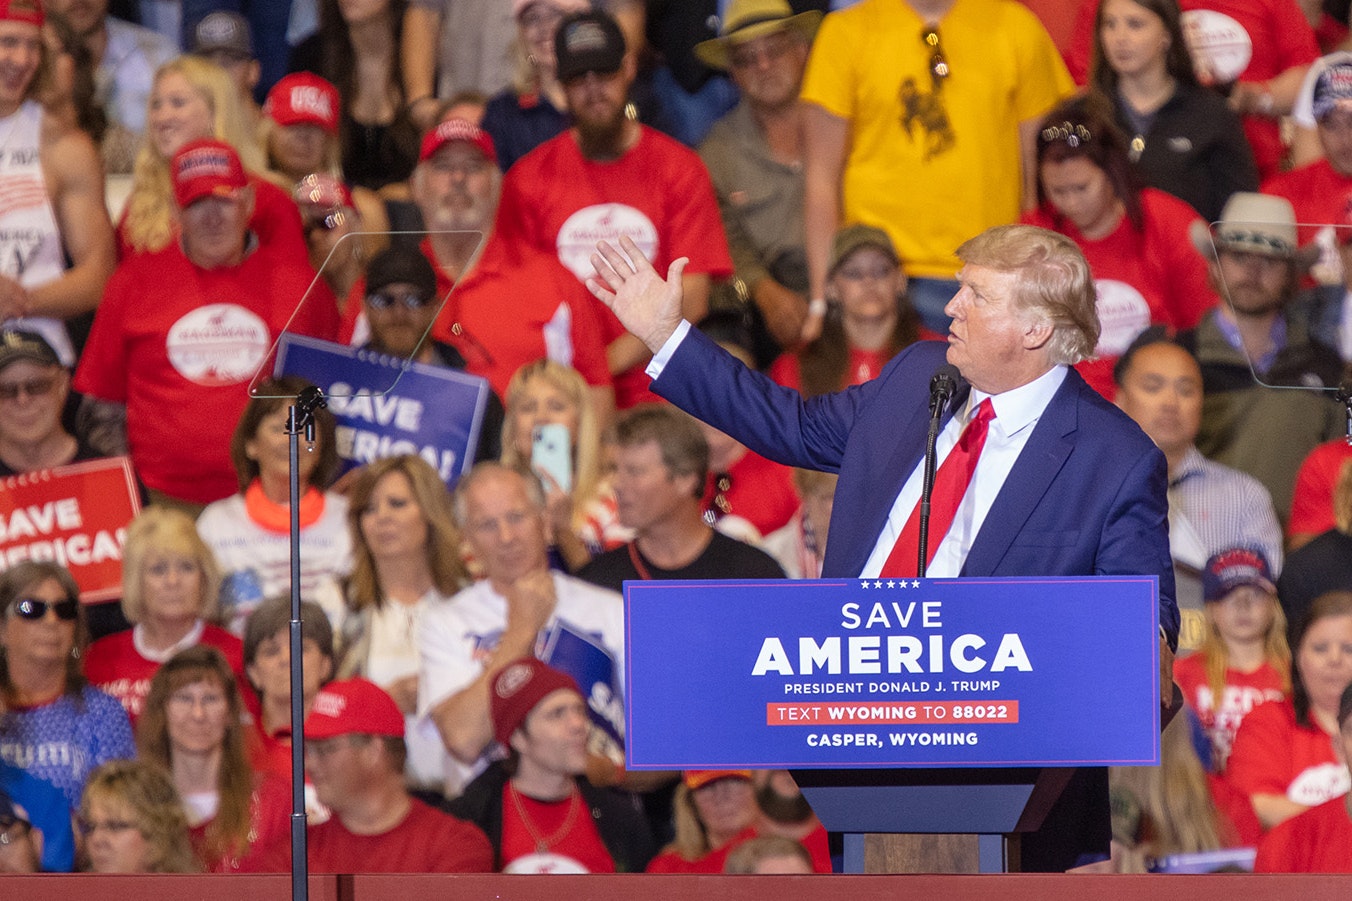 Former President Donald Trump at a Casper, Wyoming, rally in May 2022.